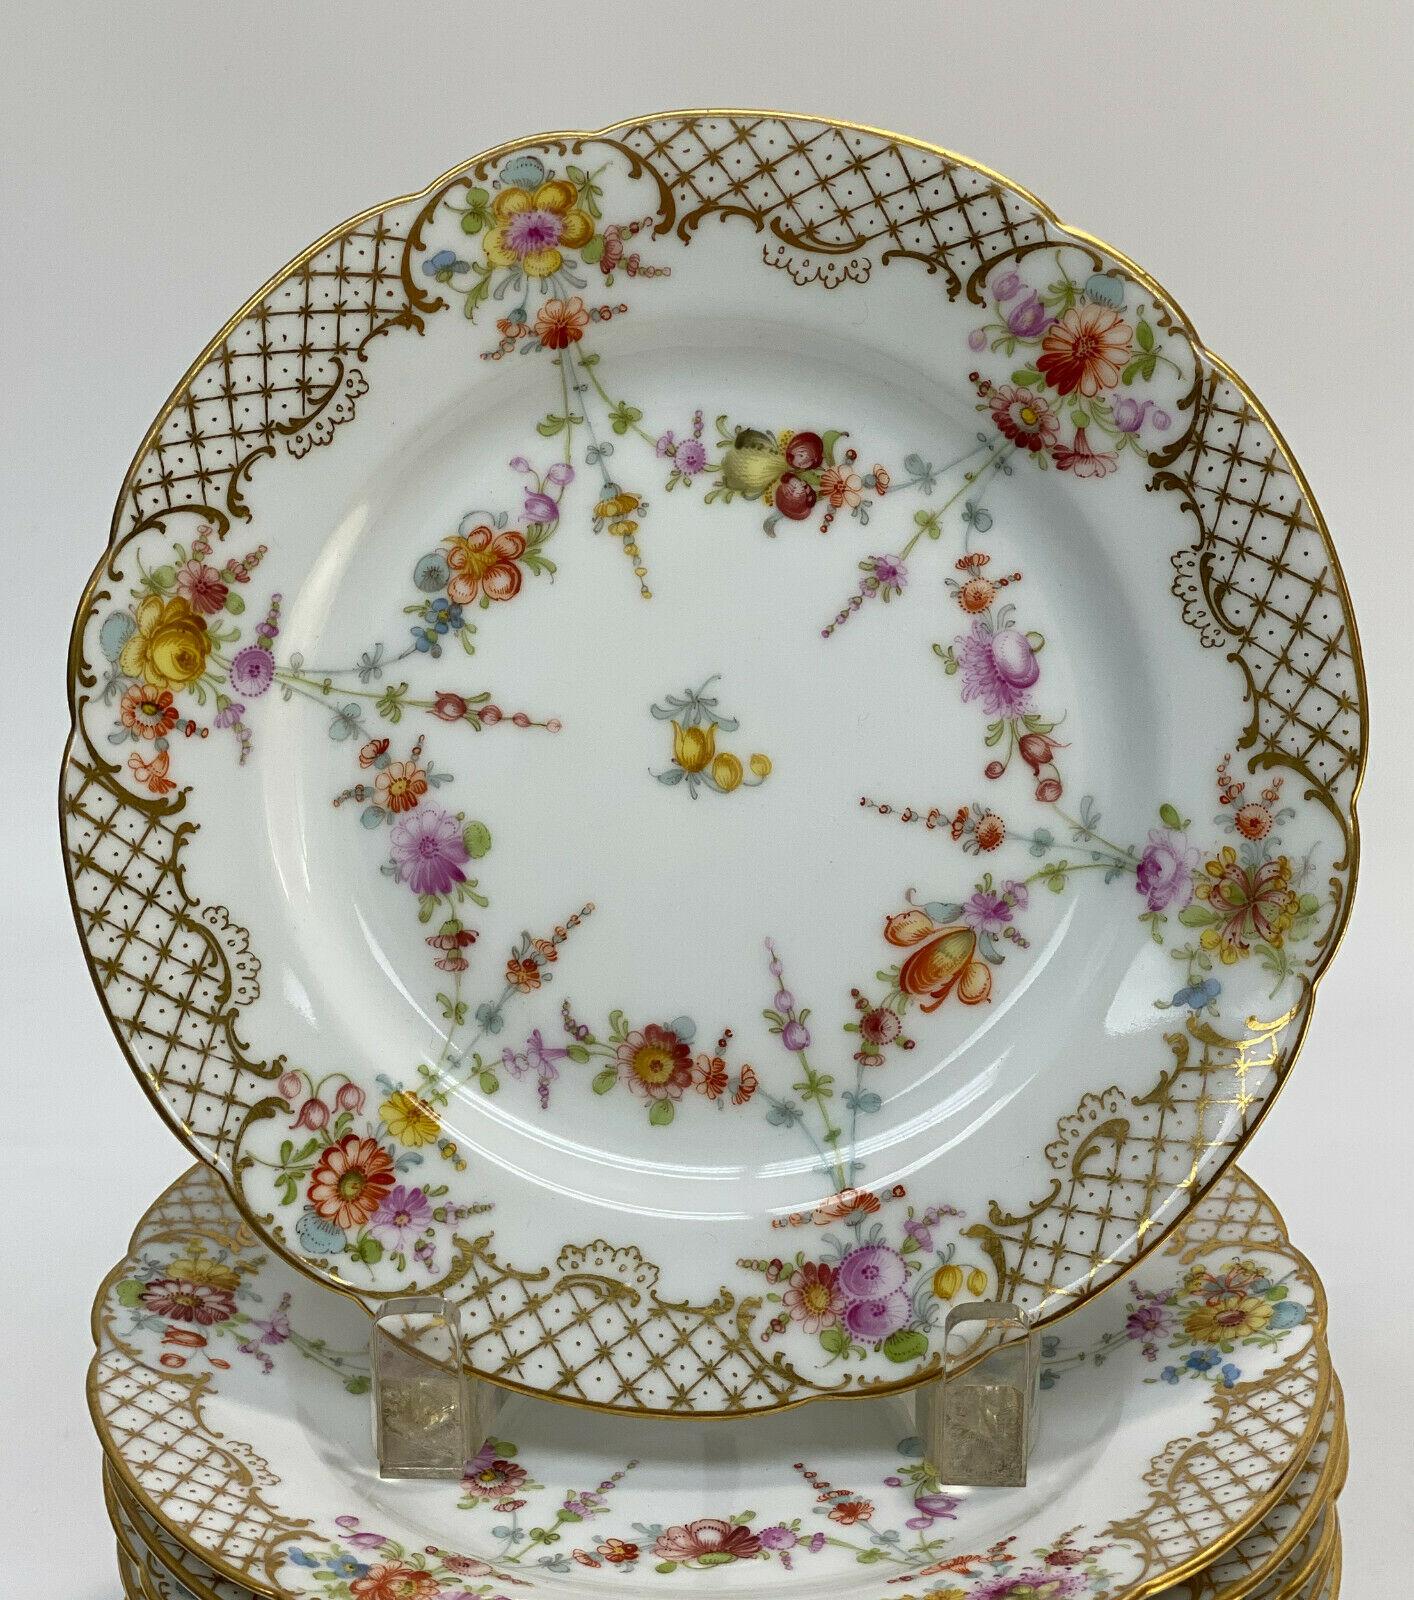 Set of 12 Dresden Ambrosius Lamm Hand Painted Porcelain Dessert Plates, Florals

Hand painted floral garlands throughout with gilt star pattern to the scalloped rimmed edge. Dresden Ambrosius Lamm mark to the underside base.

Additional